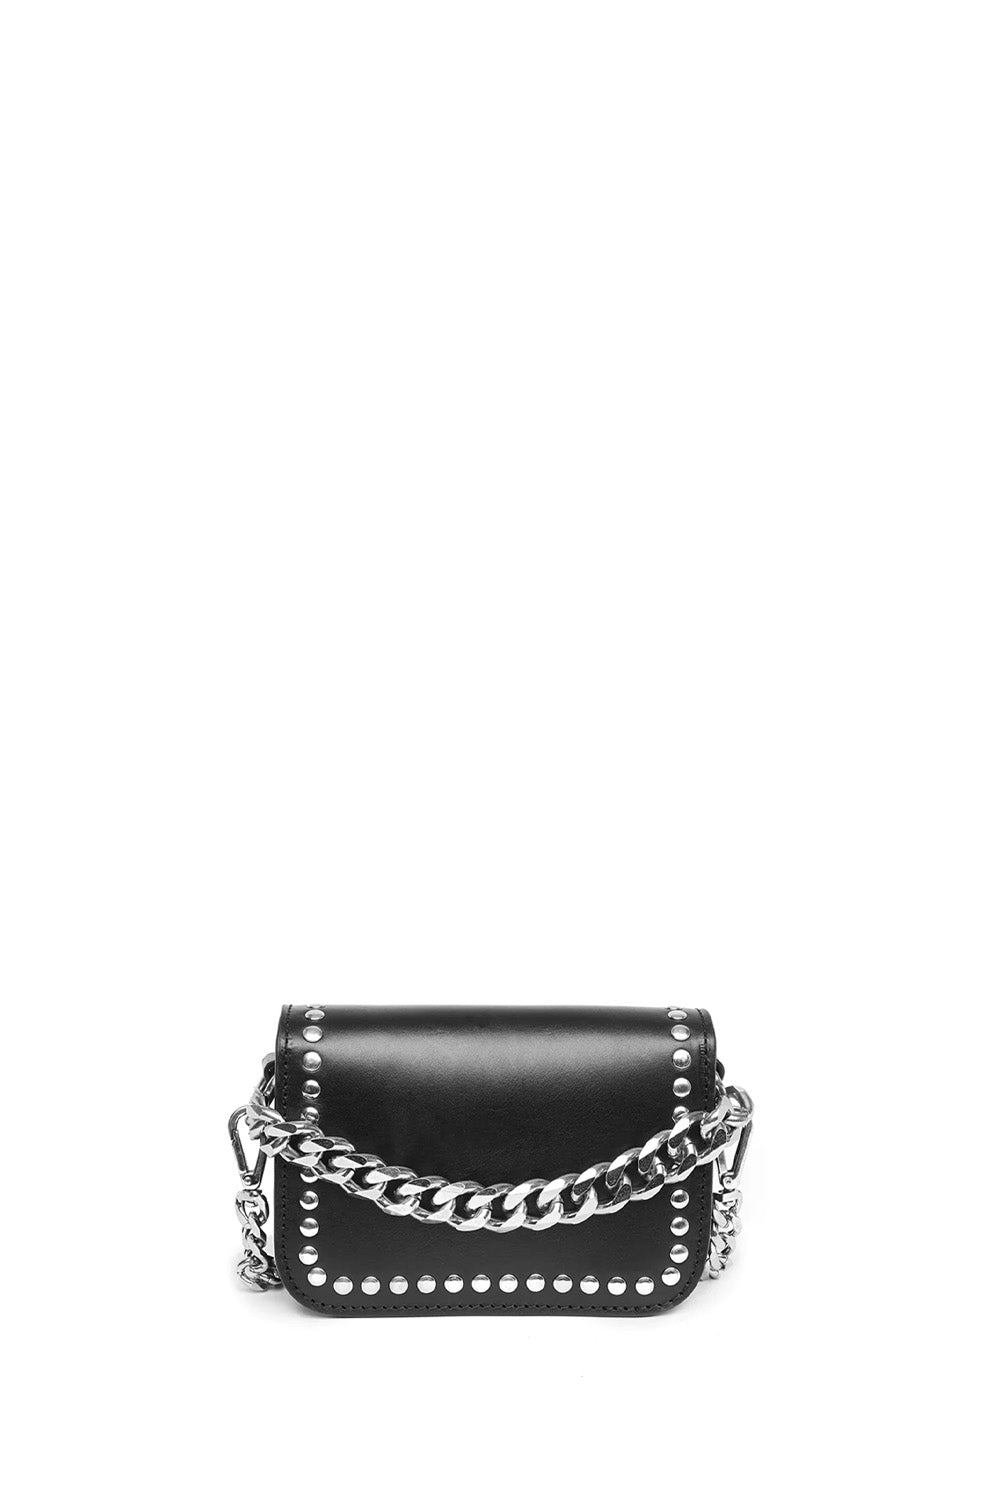 L.A. STUDS MICRO BAG Leather micro bag. Front studded flap with snap button closure. Front silver colored metal logo detail. One internal patch pocket. Leather lining. Shoulder leather strap and metal chain little strap. Made in Italy. 100% Leather. Lengh